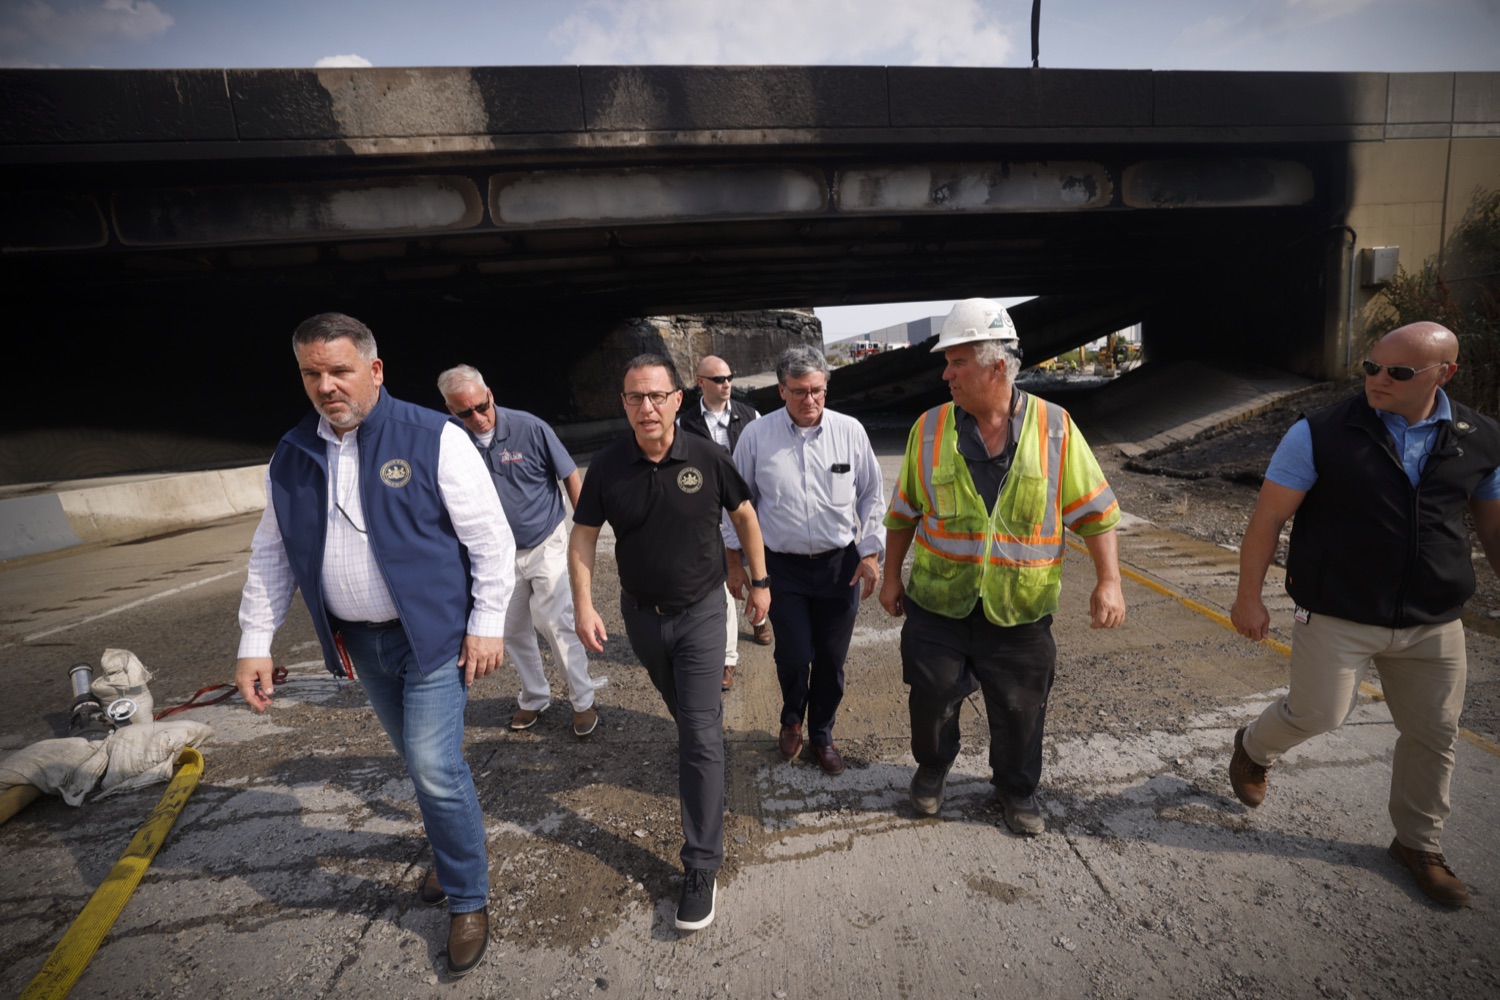 Governor Josh Shapiro, along with officials from the Shapiro Administration, the City of Philadelphia, and SEPTA provided an update on the response to the vehicle fire on the Route 73/Cottman Avenue ramp under Interstate 95 in Philadelphia, which caused the roadway in this area to partially collapse, and heavily damaged the southbound structure. The interstate is closed in both directions..."Interstate 95 is a critical artery that supports our economy and plays an important role in Pennsylvanians' day to day lives. My Administration is all hands on deck to repair this safely and as efficiently as possible," said Governor Shapiro. "We will rebuild and recover - and in the meantime, we will make sure people can get to where they need to go safely."..This morning, according to first responders in Philadelphia and the Pennsylvania State Police, at approximately 6:20am, a vehicle fire under I-95 near the Cottman Avenue exit in Northeast Philadelphia caused a portion of the highway to collapse. Preliminary reports indicate a commercial truck carrying a petroleum-based product was the source of the fire. Since the crash occurred, PEMA has also been on-site, coordinating response efforts with local and federal partners.  JUNE 11, 2023 - PHILADELPHIA, PA.<br><a href="https://filesource.amperwave.net/commonwealthofpa/photo/23248_gov_I95Collapse_dz_035.JPG" target="_blank">⇣ Download Photo</a>